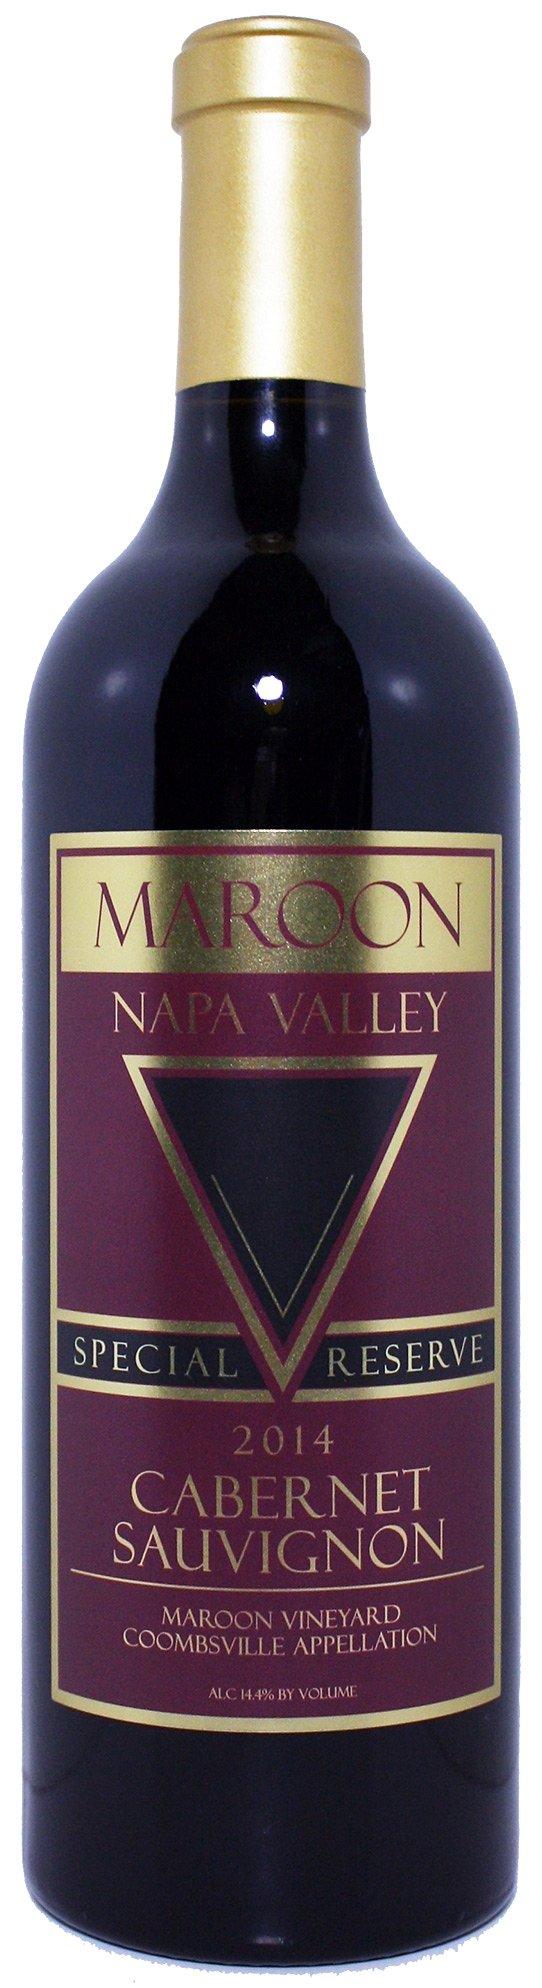 Maroon 2014 Cabernet Sauvignon Special Reserve, Maroon Vyd., Coombsville, Napa Valley